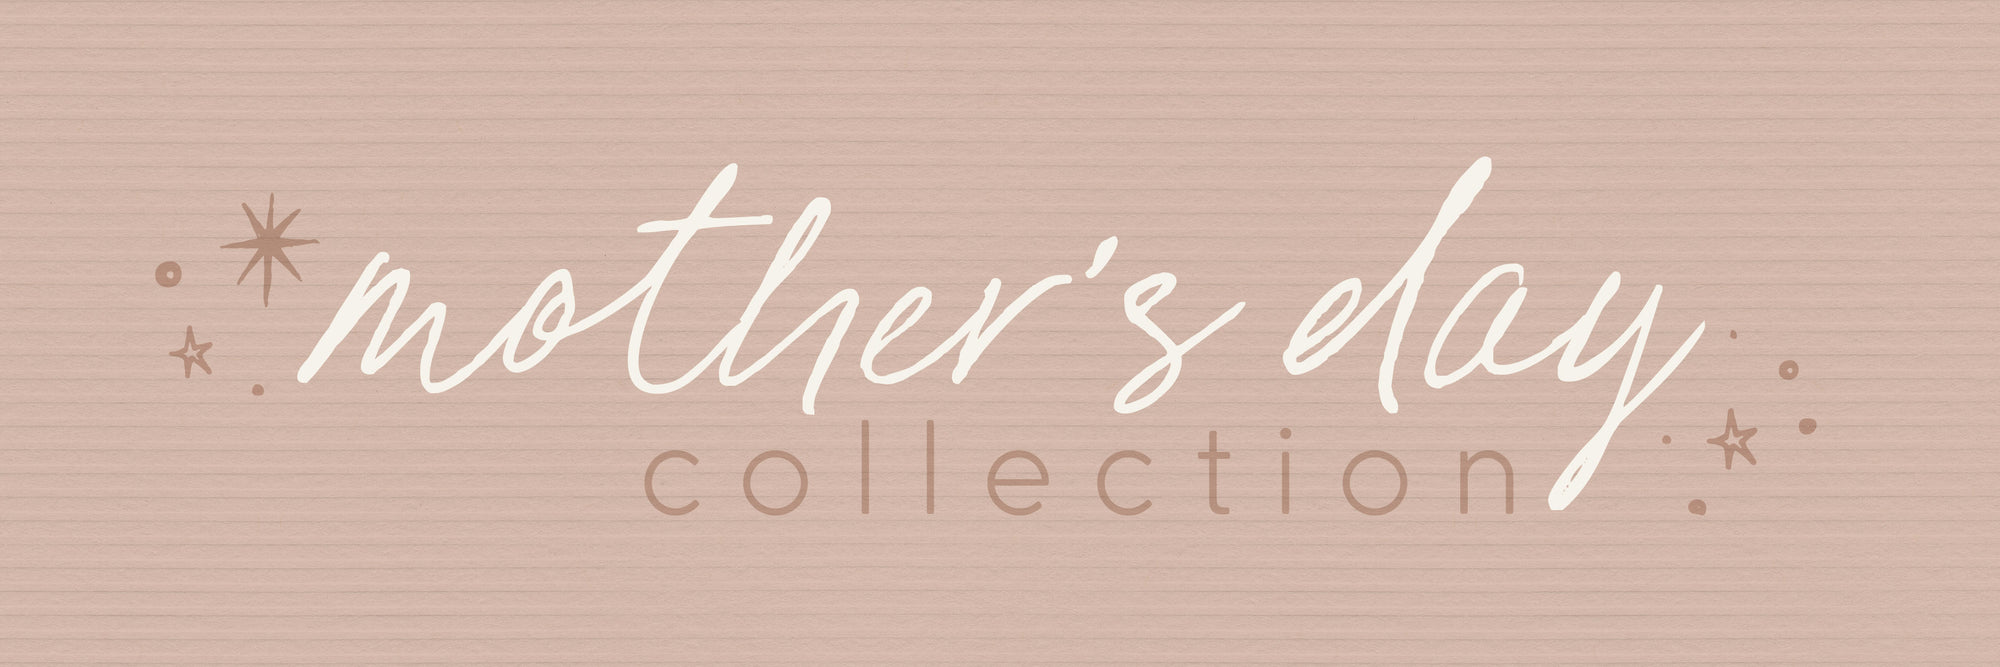 The Mother's Day Collection